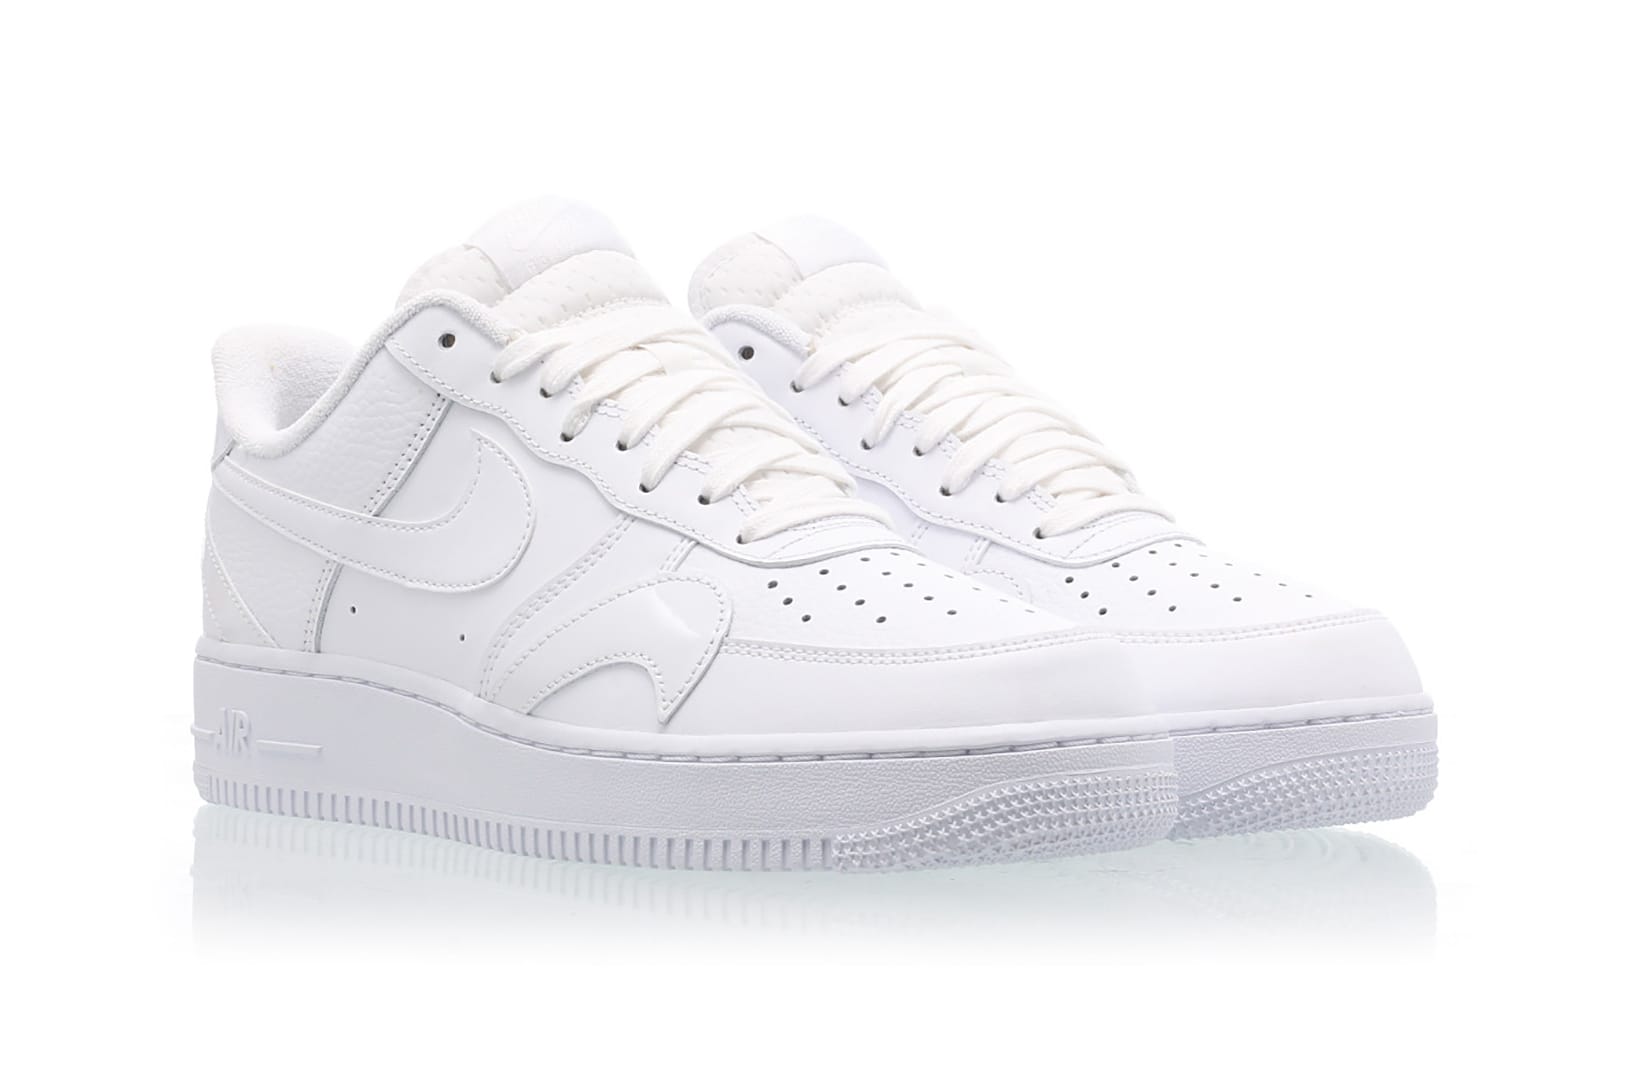 Nike Misplaced Swoosh Air Force 1 Low 